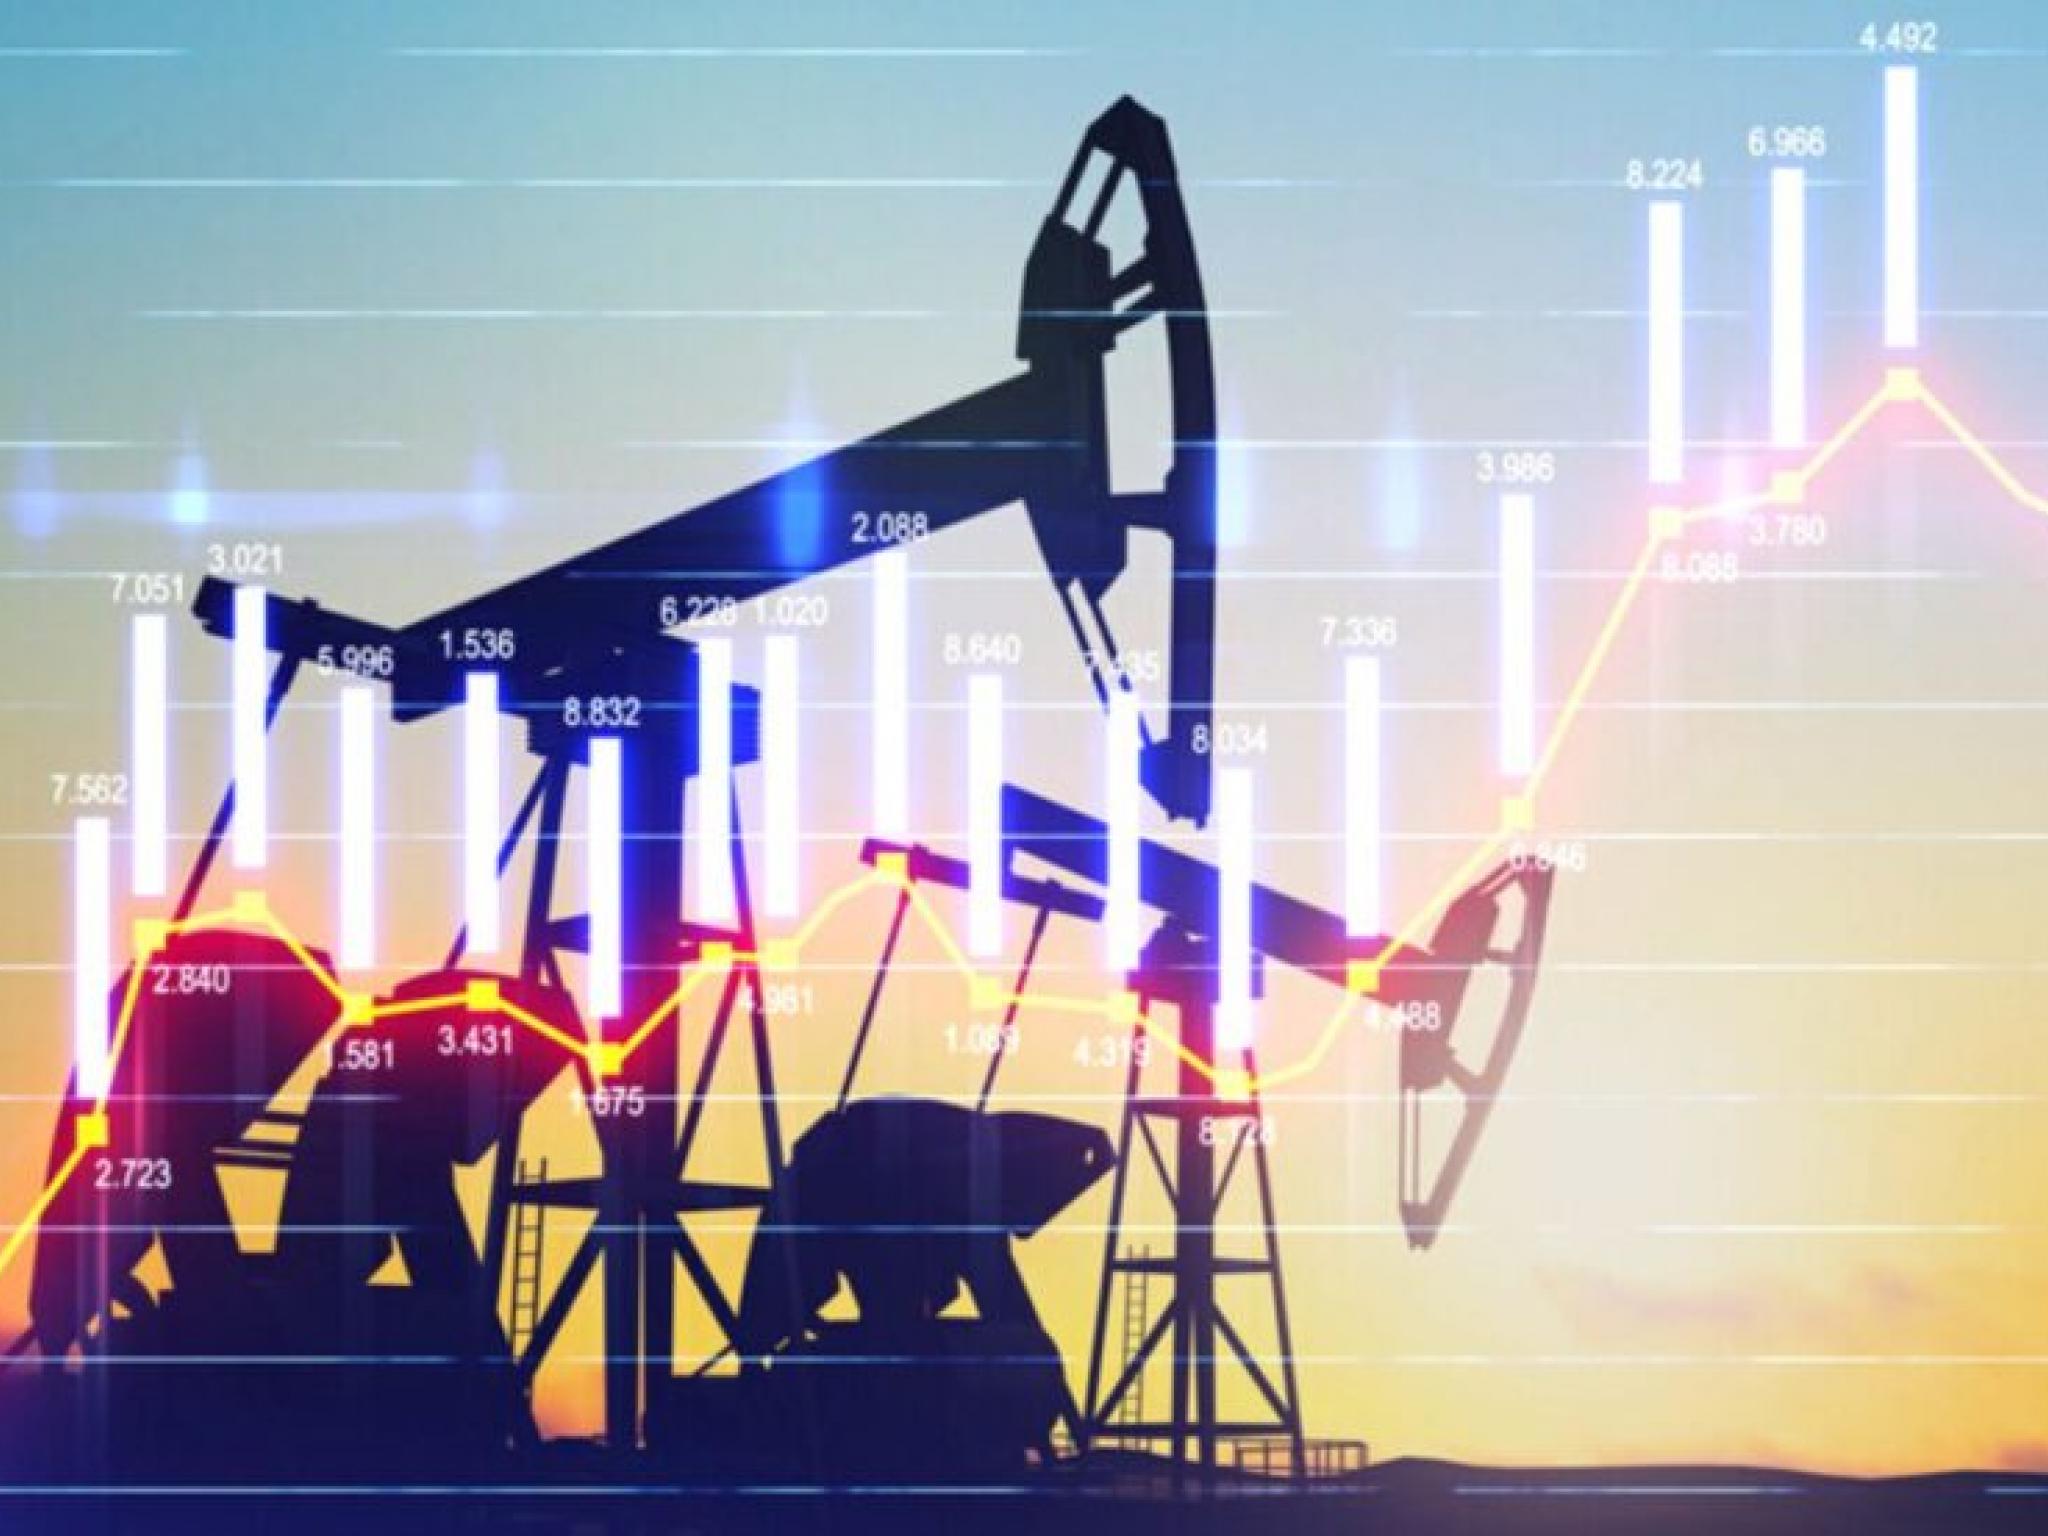  iea-forecasts-slowdown-in-oil-demand-contrasts-positive-outlook-by-opec 